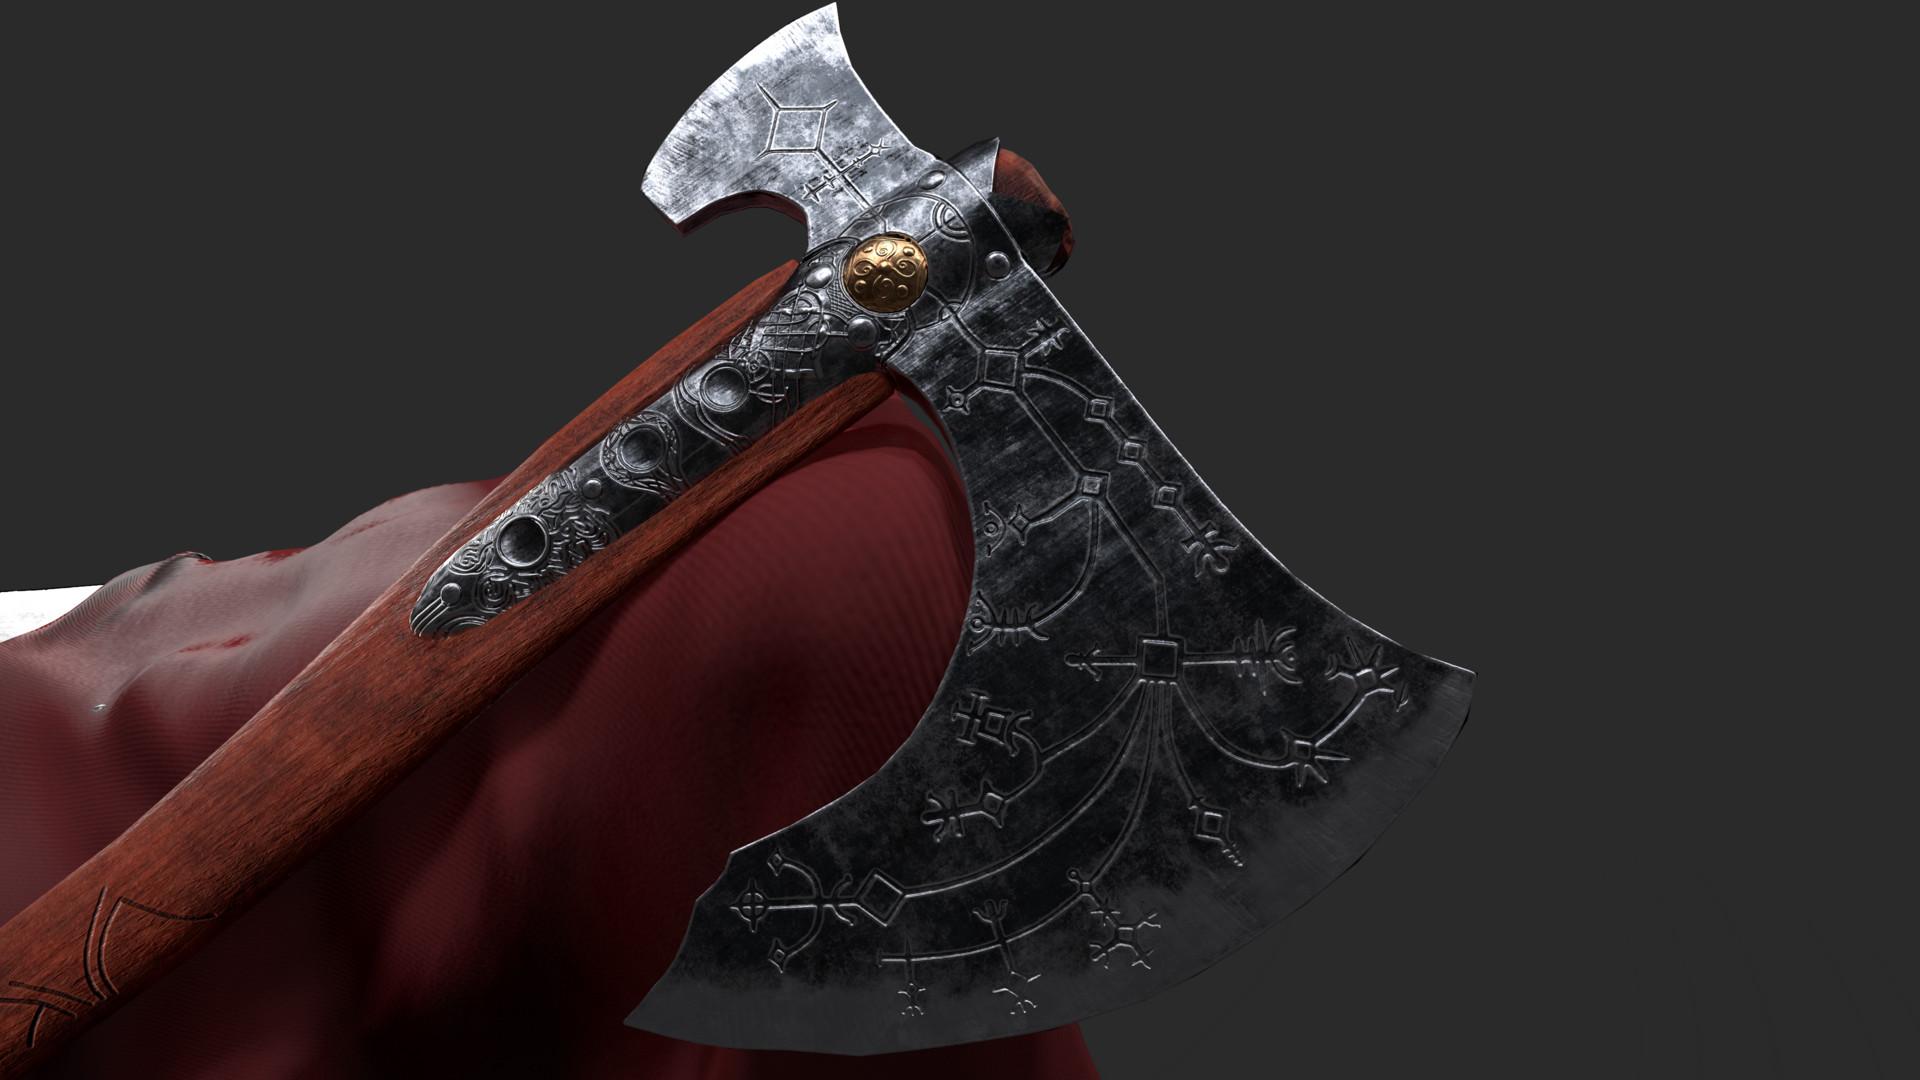 Happy to share A 3D model of the Leviathan Axe I made a